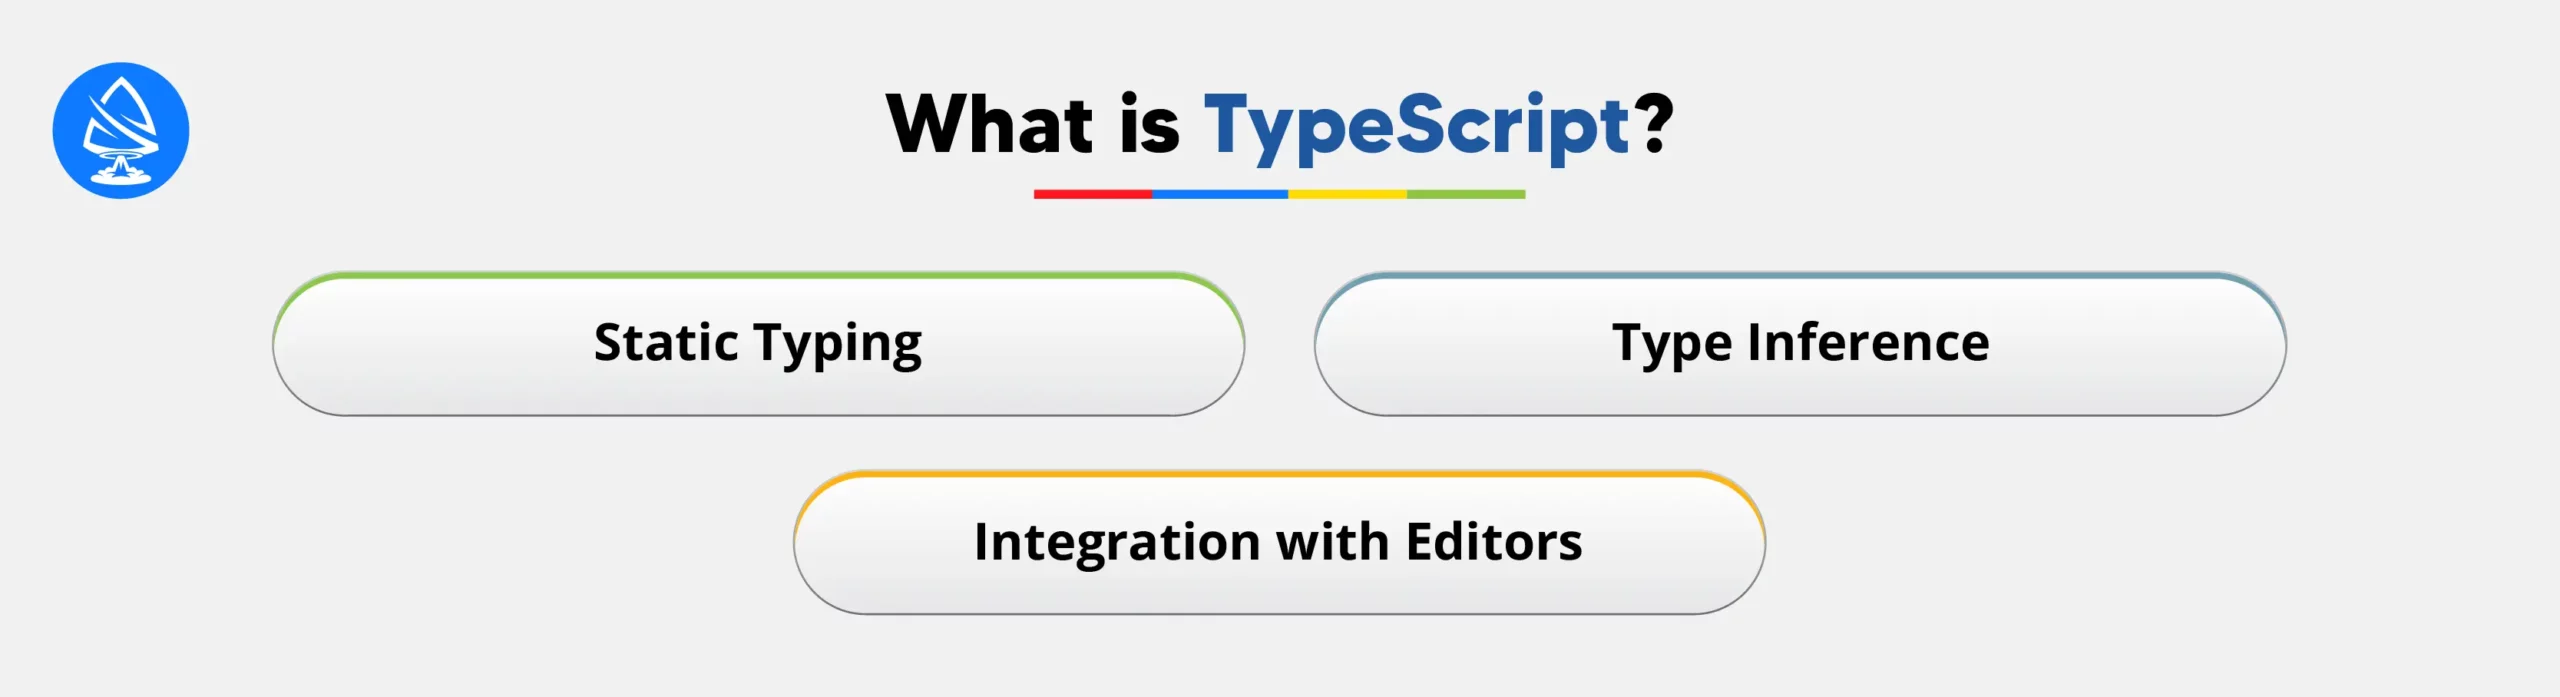 What is TypeScript? 